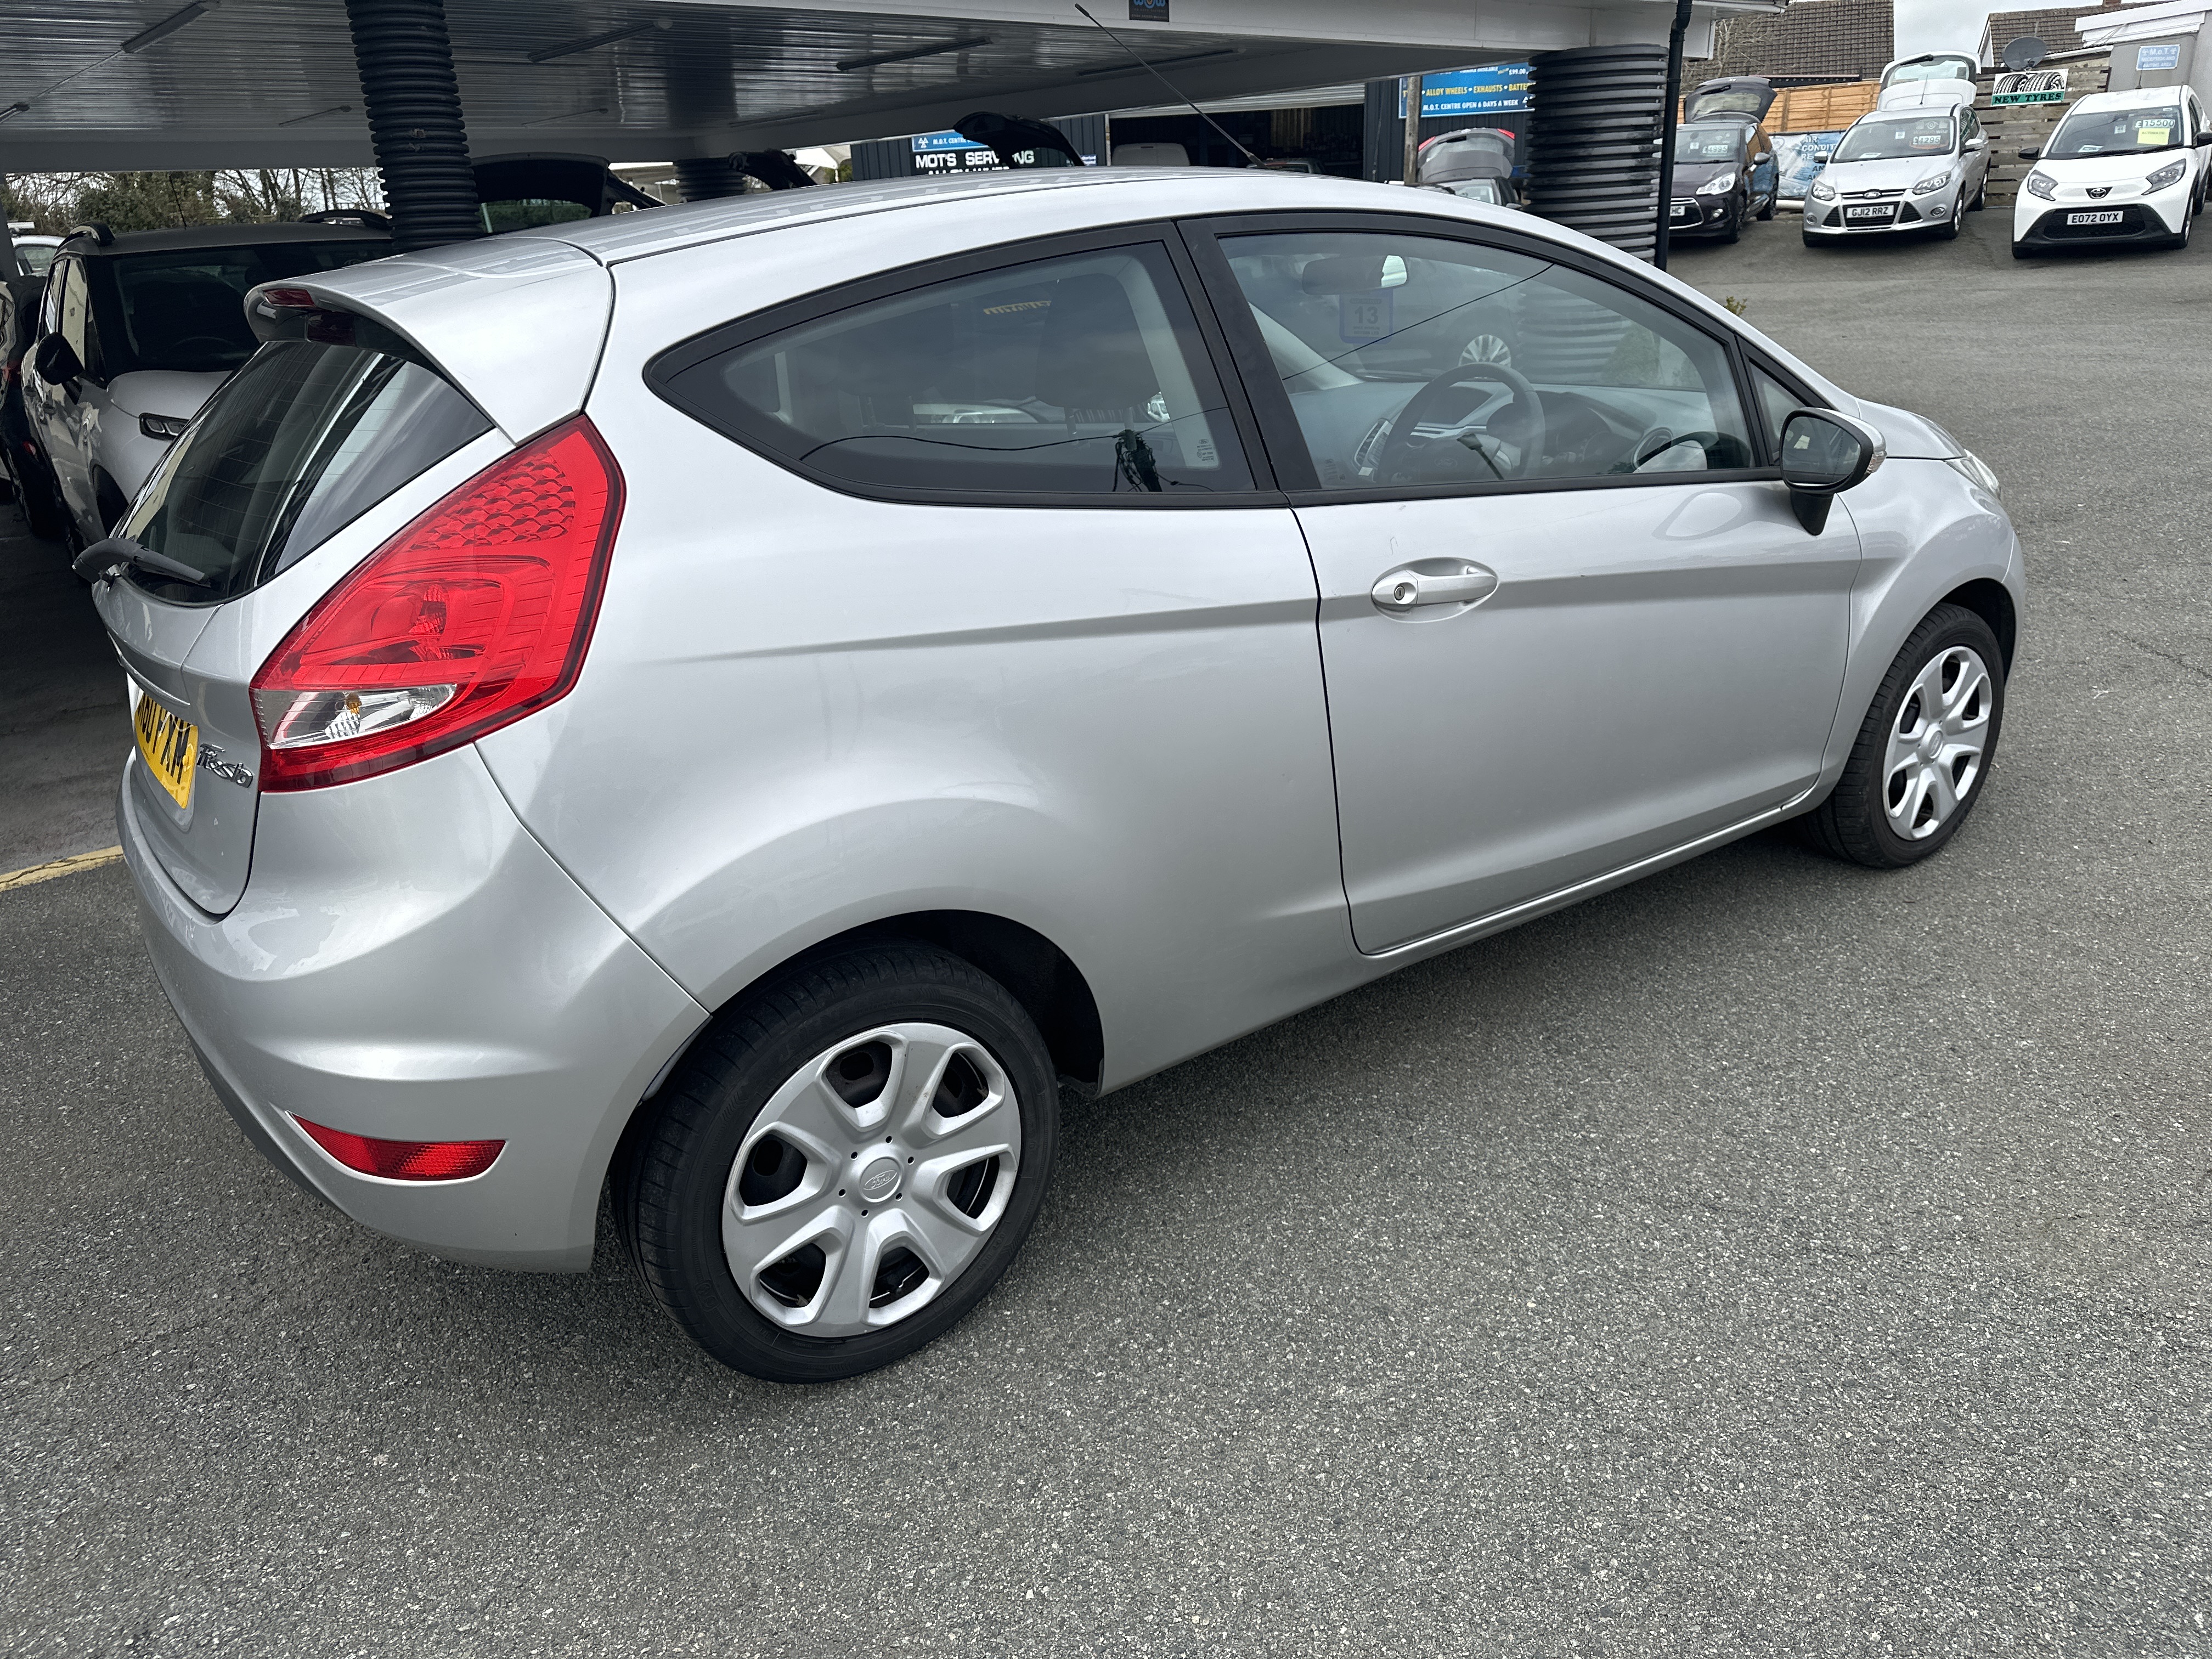 Ford FIESTA EDGE 70 for sale at Mike Howlin Motor Sales Pembrokeshire